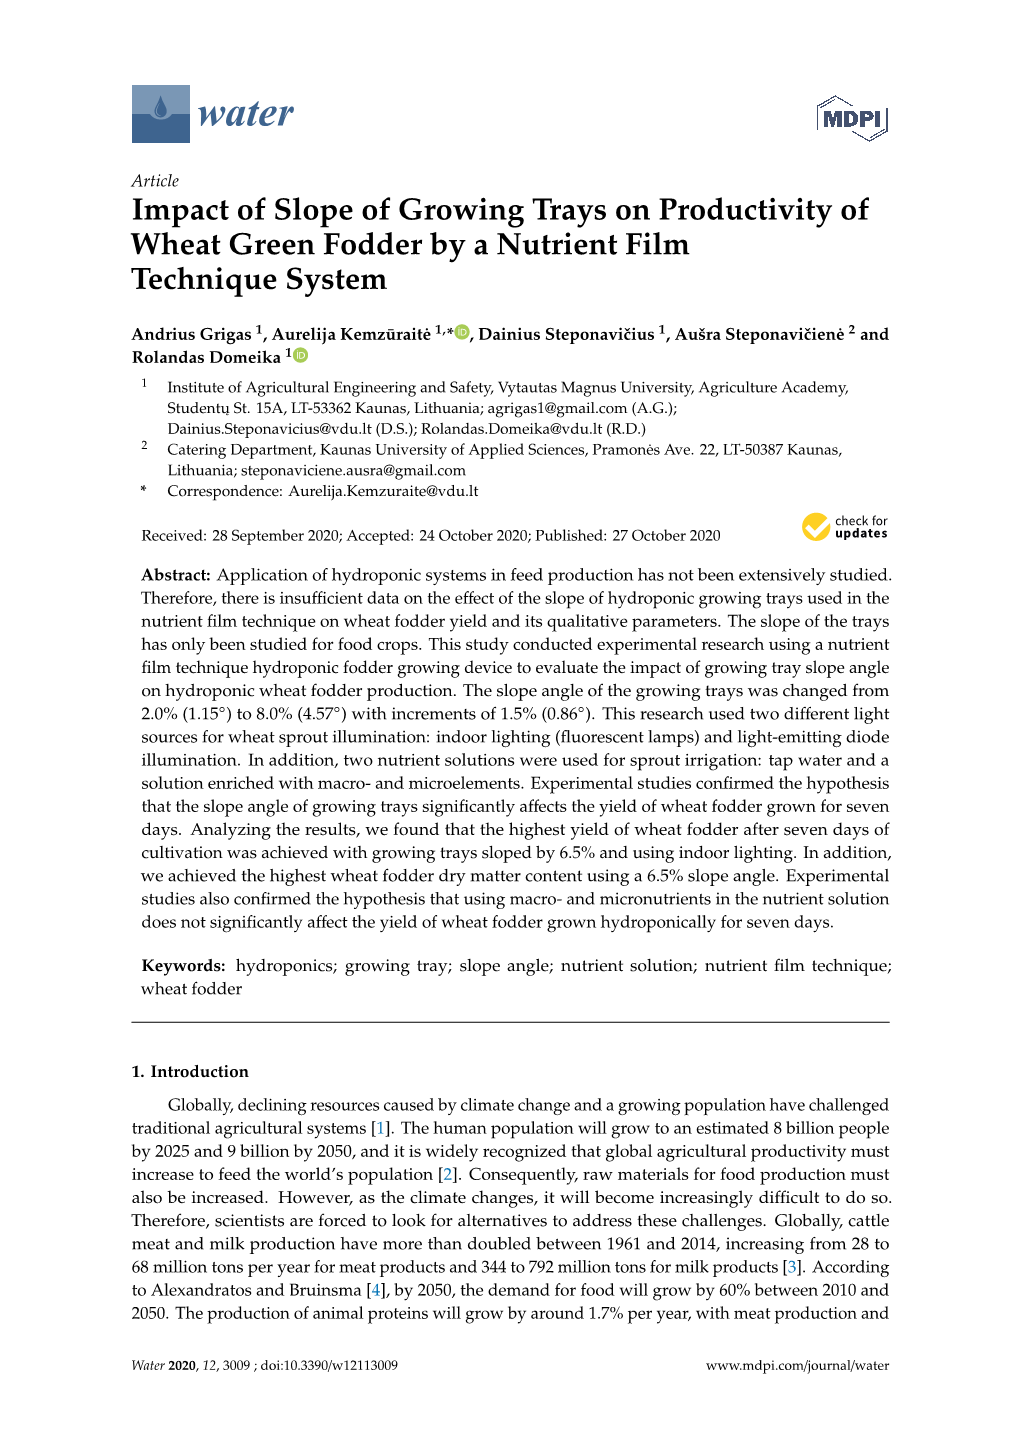 Impact of Slope of Growing Trays on Productivity of Wheat Green Fodder by a Nutrient Film Technique System